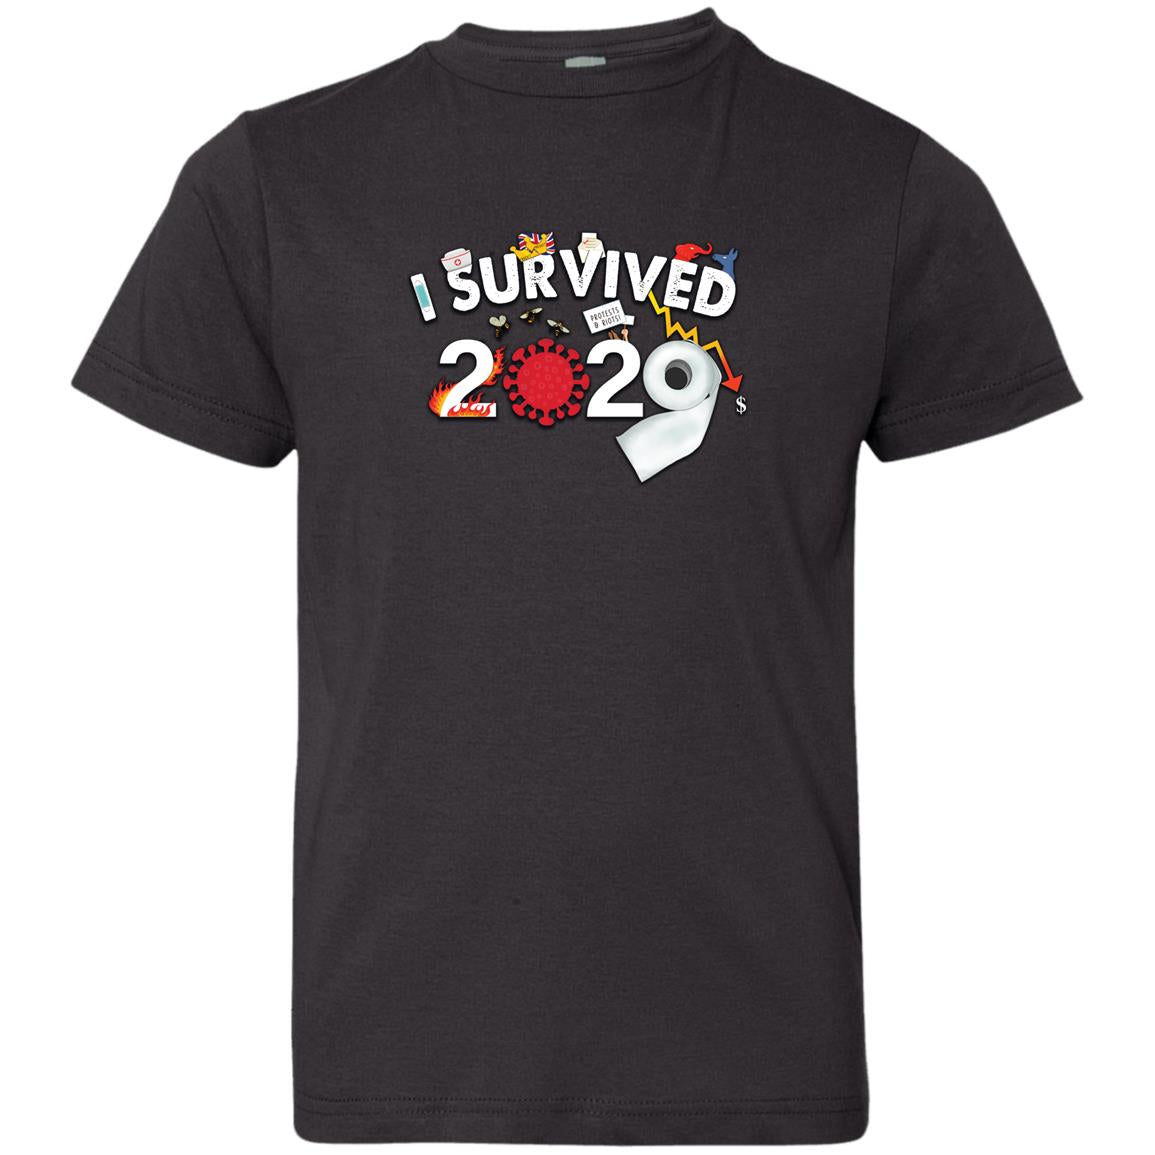 I Survived 2020 - Youth Jersey T-Shirt